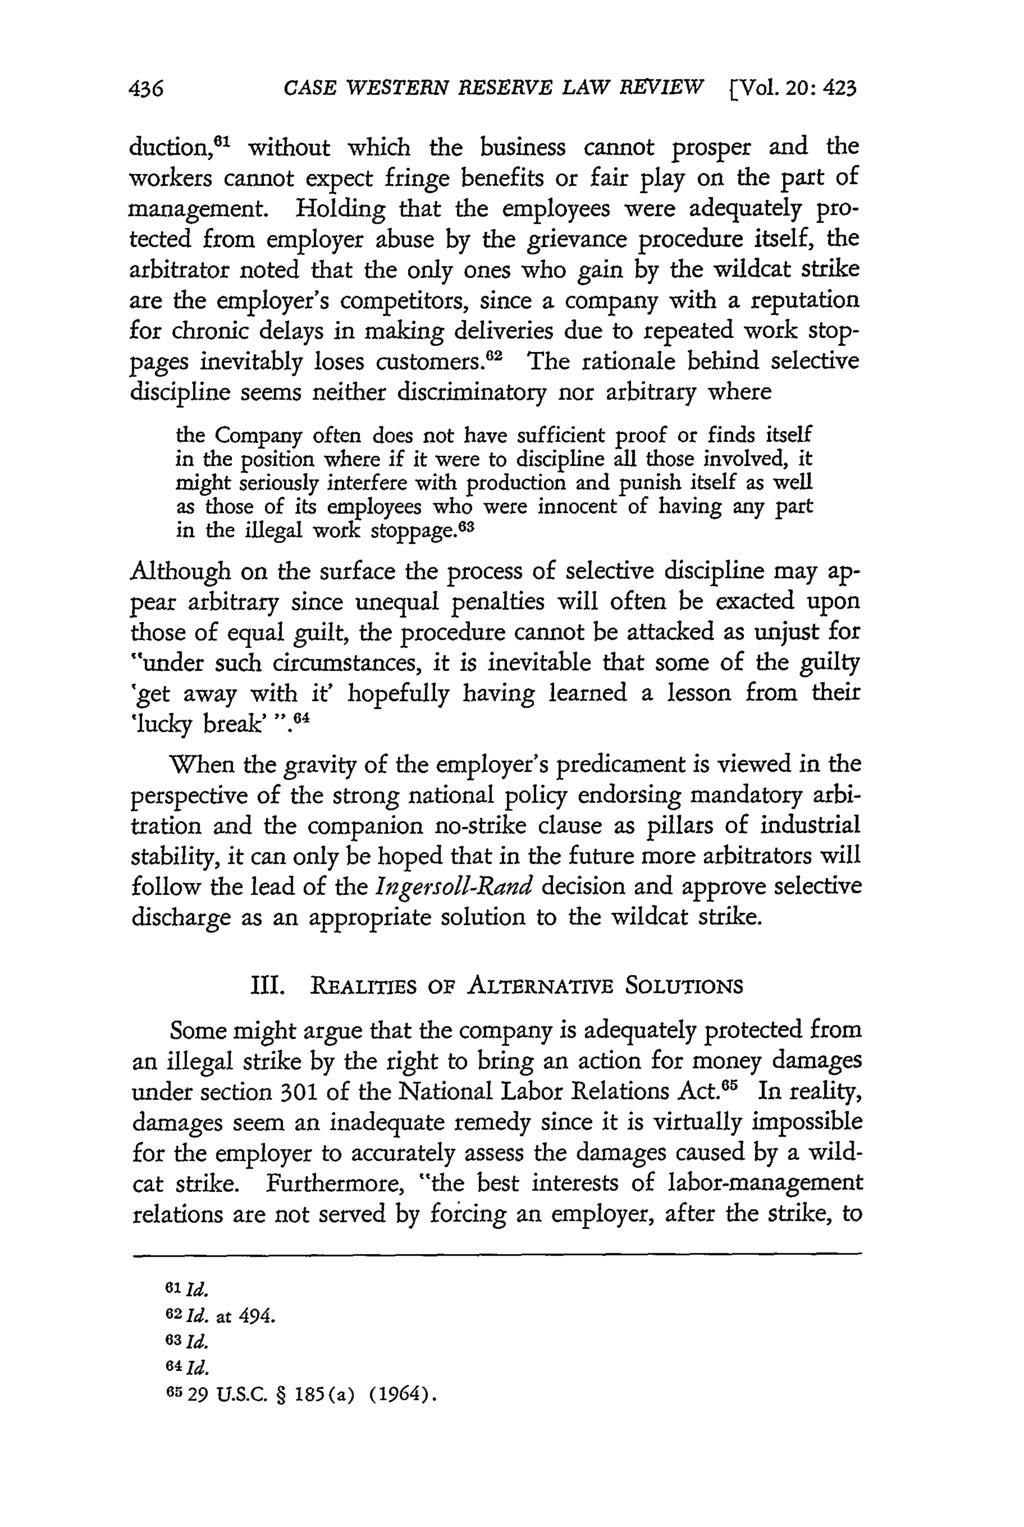 CASE WESTERN RESERVE LAW REVIEW [Vol. 20: 423 duction, 6 ' without which the business cannot prosper and the workers cannot expect fringe benefits or fair play on the part of management.